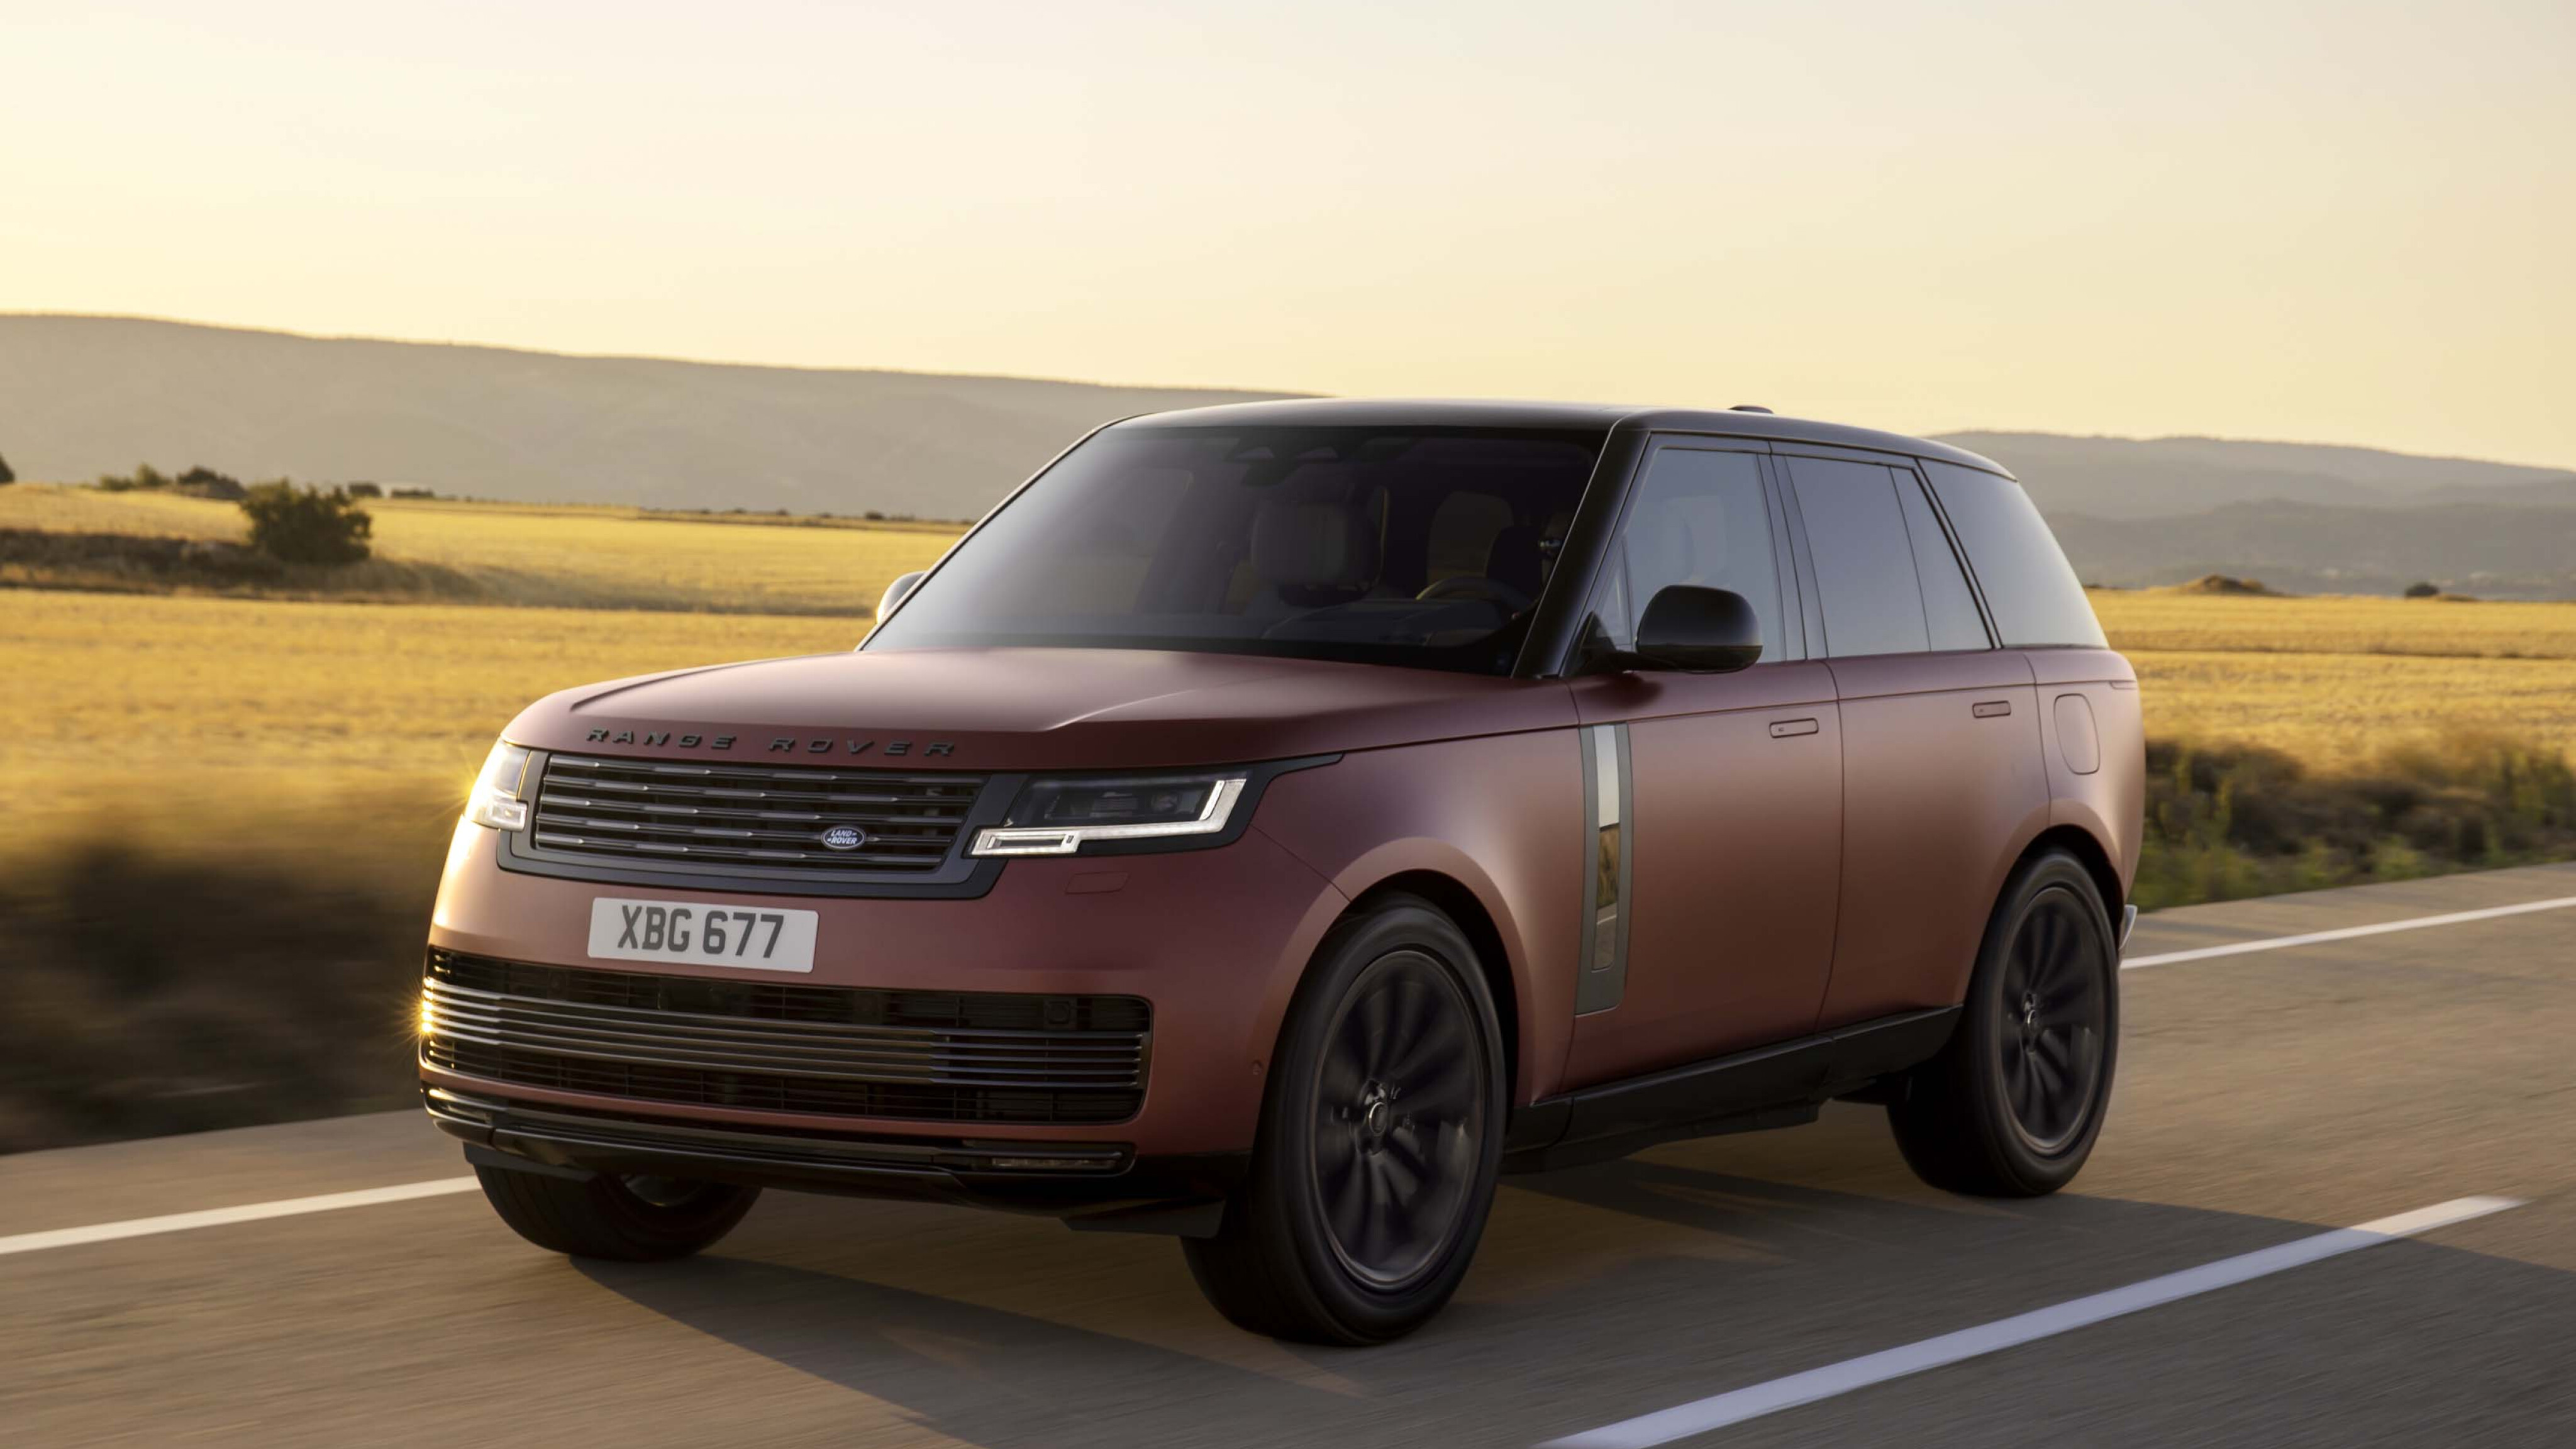 2023 Range Rover PHEV 510 review: International first drive